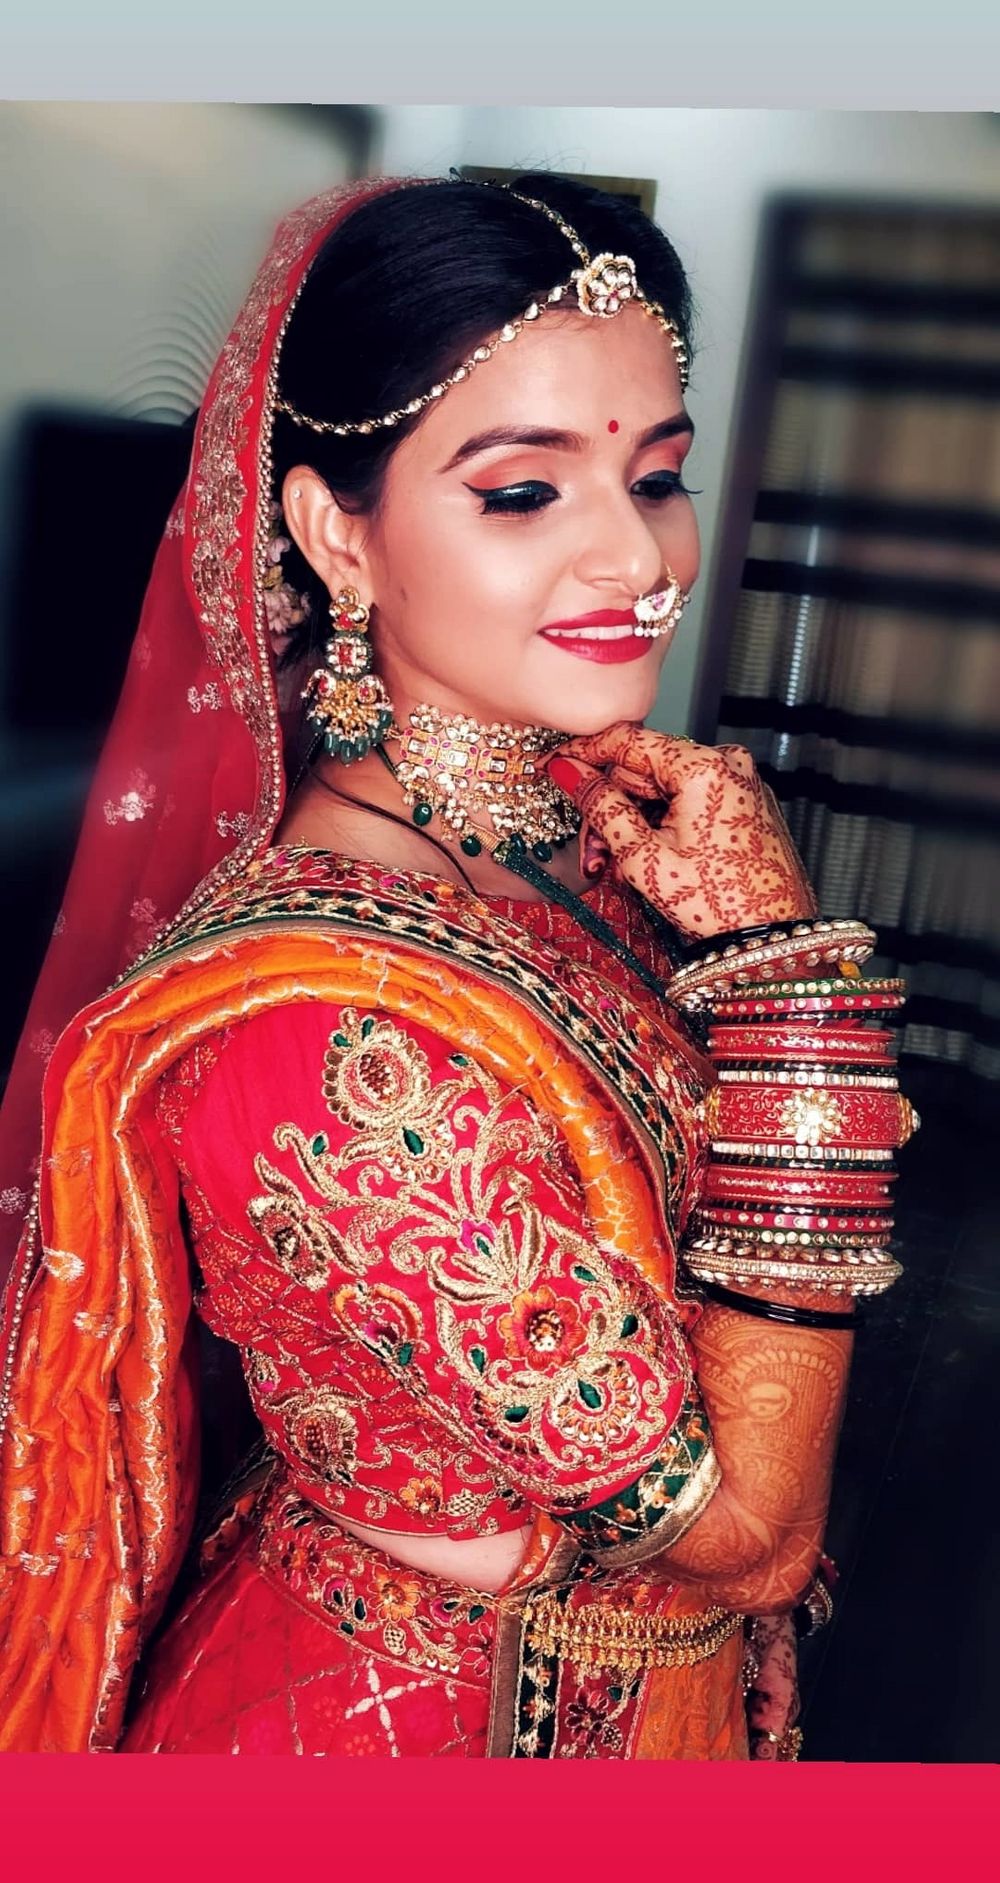 Photo By Rupearls Makeovers - Bridal Makeup